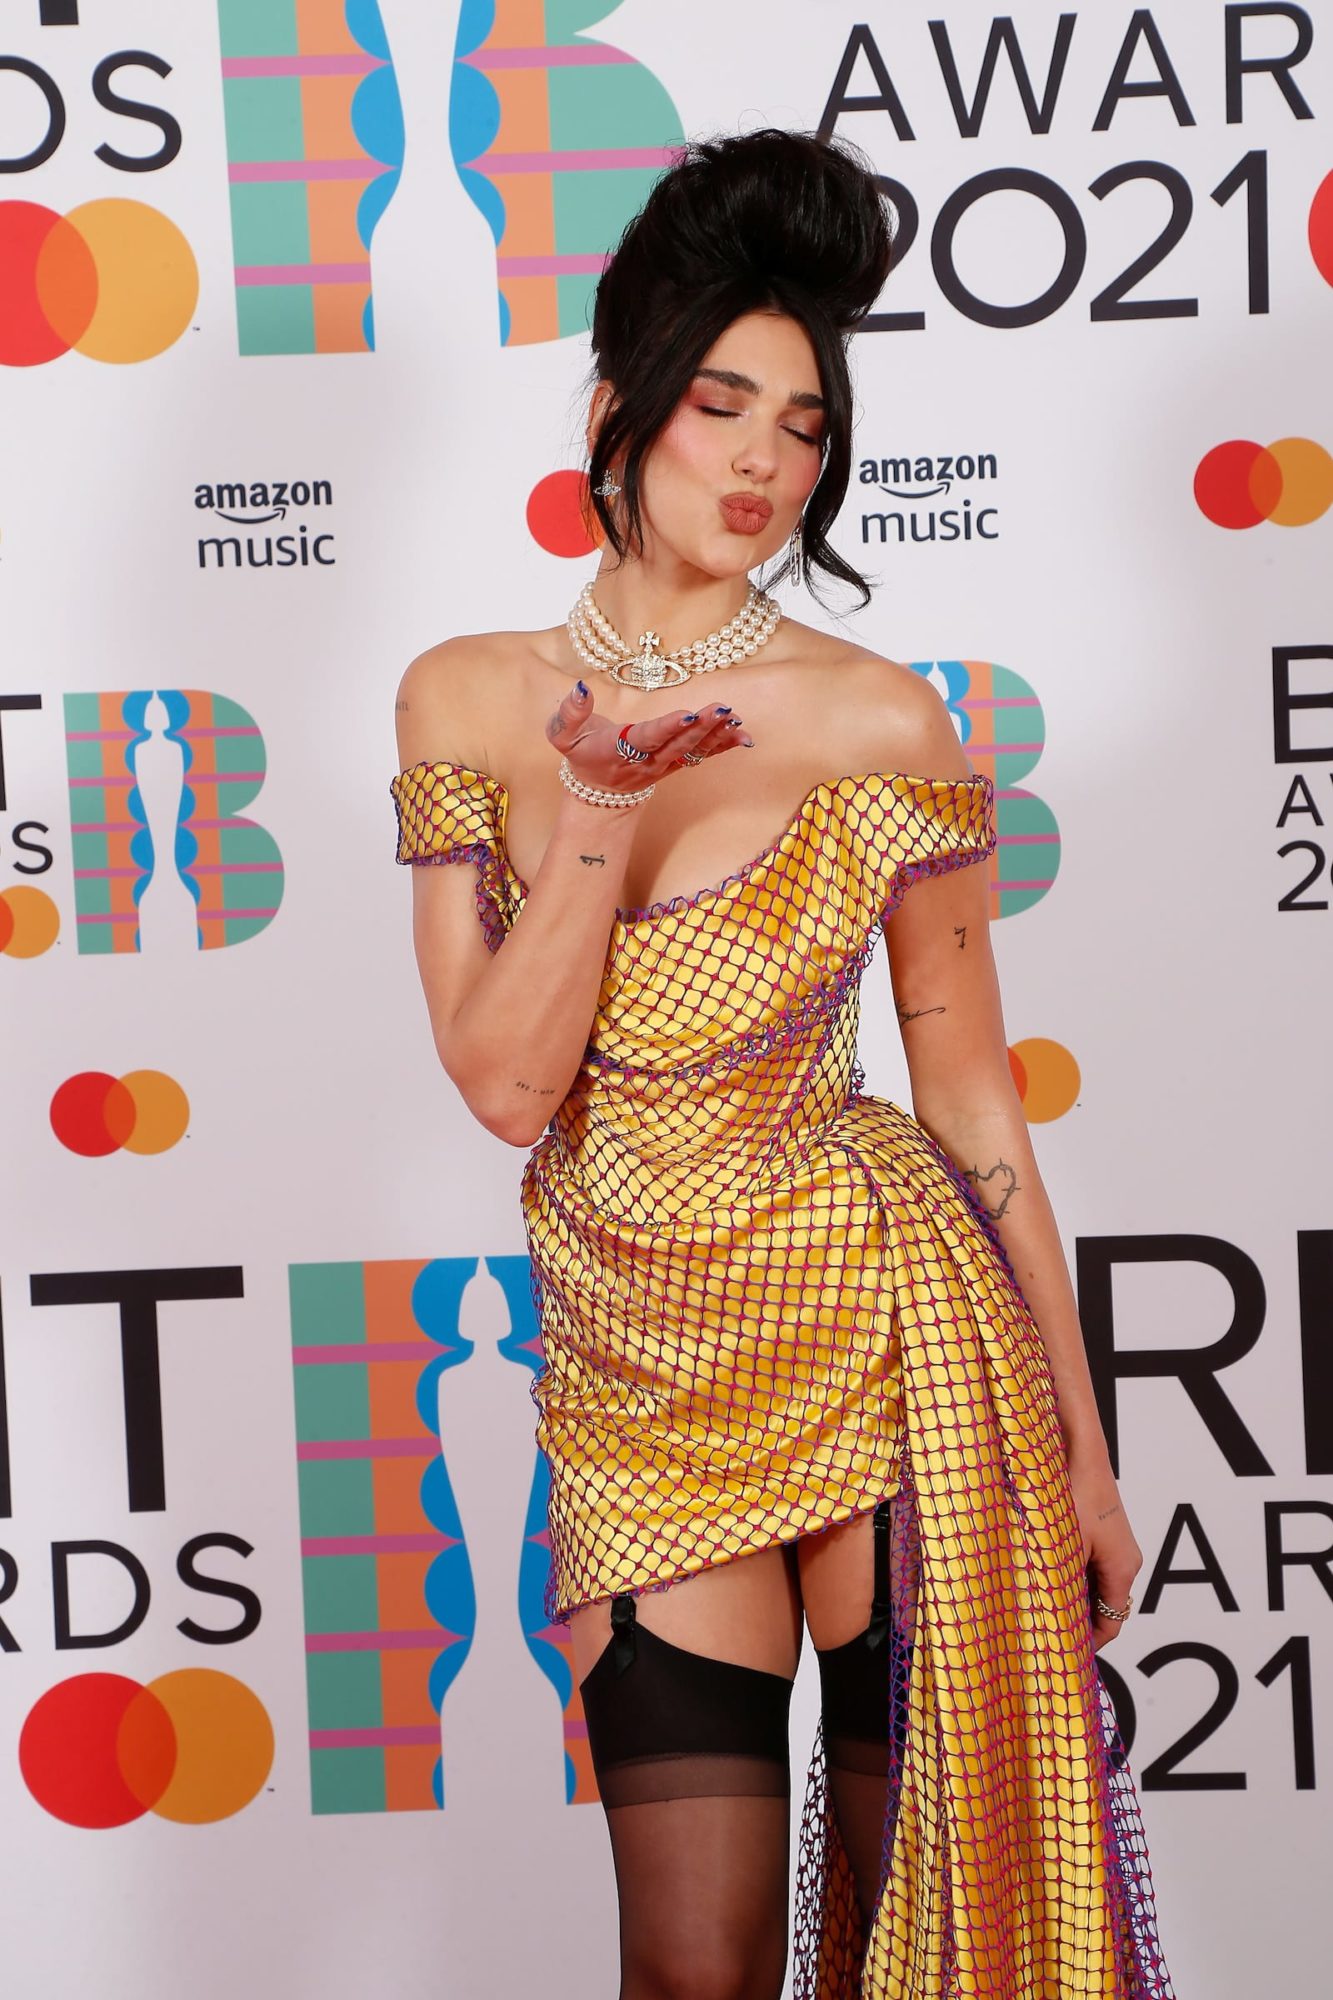 Singer Dua Lipa attends the BRIT Awards at the O2 Arena in London, Britain May 11, 2021. ©John Marshall/Handout via v REUTERS THIS IMAGE HAS BEEN SUPPLIED BY A THIRD PARTY. NO RESALES. NO ARCHIVES. MANDATORY CREDIT. NO NEW USAGE USE AFTER 2200GMT ON JUNE 8, 2021. FOR EDITORIAL USE ONLY IN REPORTING ON - 41ST EDITION OF THE 2021 BRIT AWARDS. IMAGE MUST BE USED IN ITS ENTIRETY - NO CROPPING OR OTHER MODIFICATIONS.